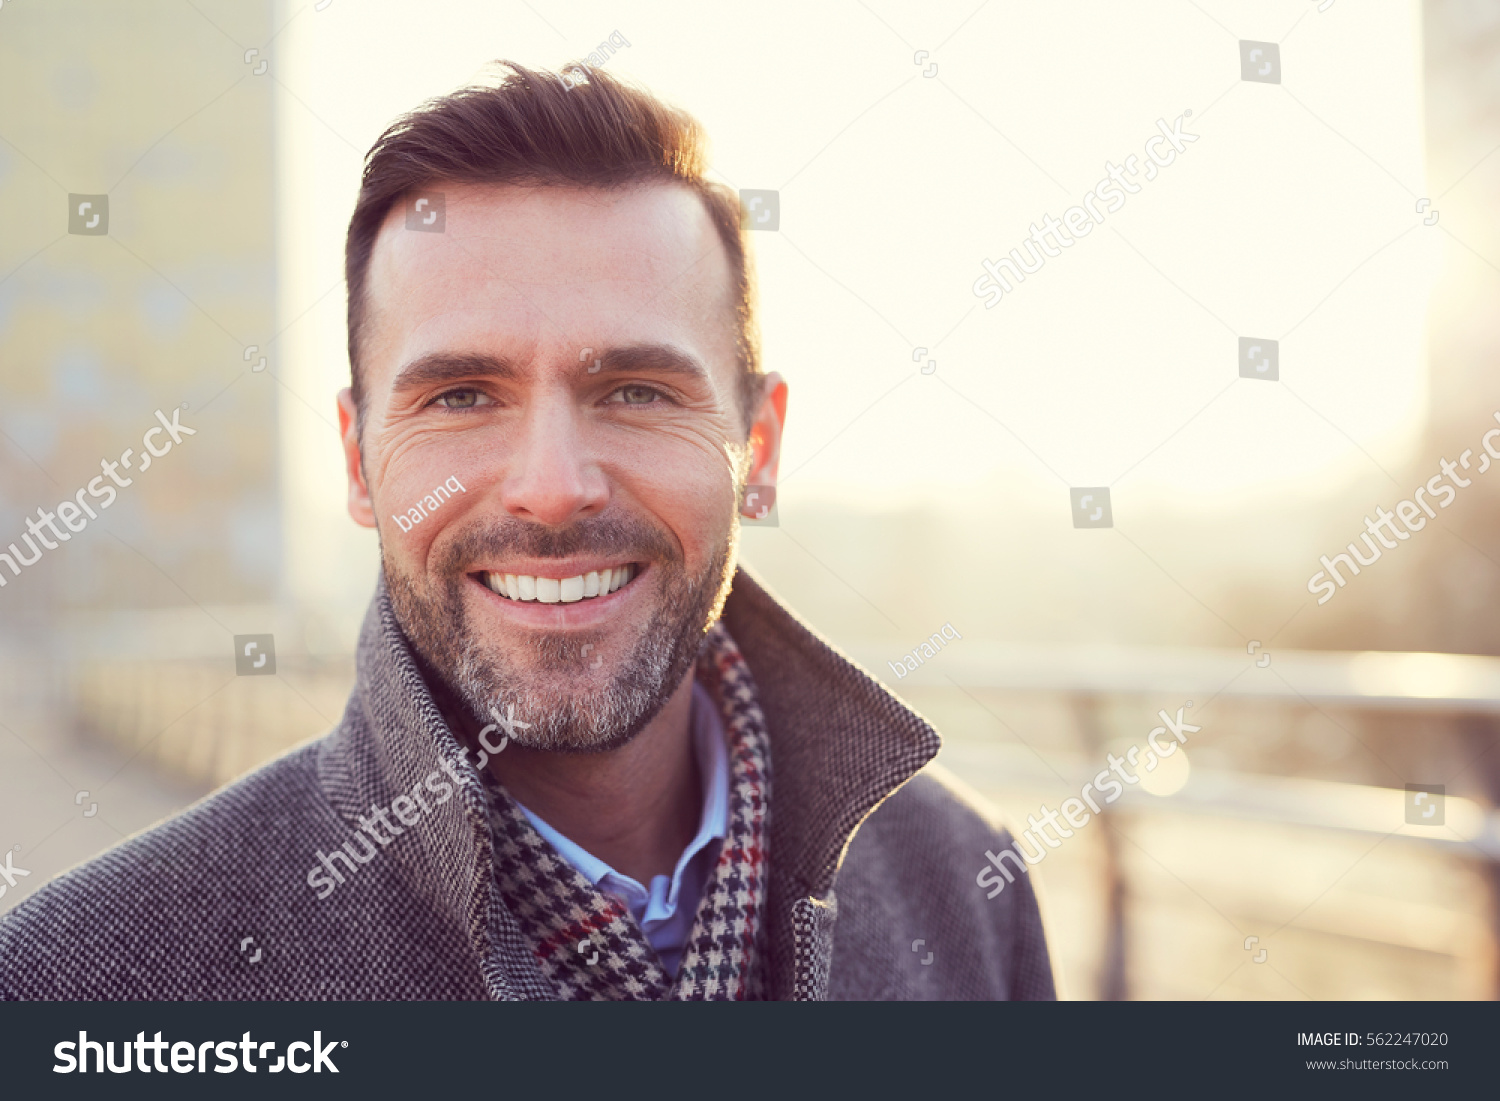 Portrait of happy man smiling outdoors during cold winter day #562247020